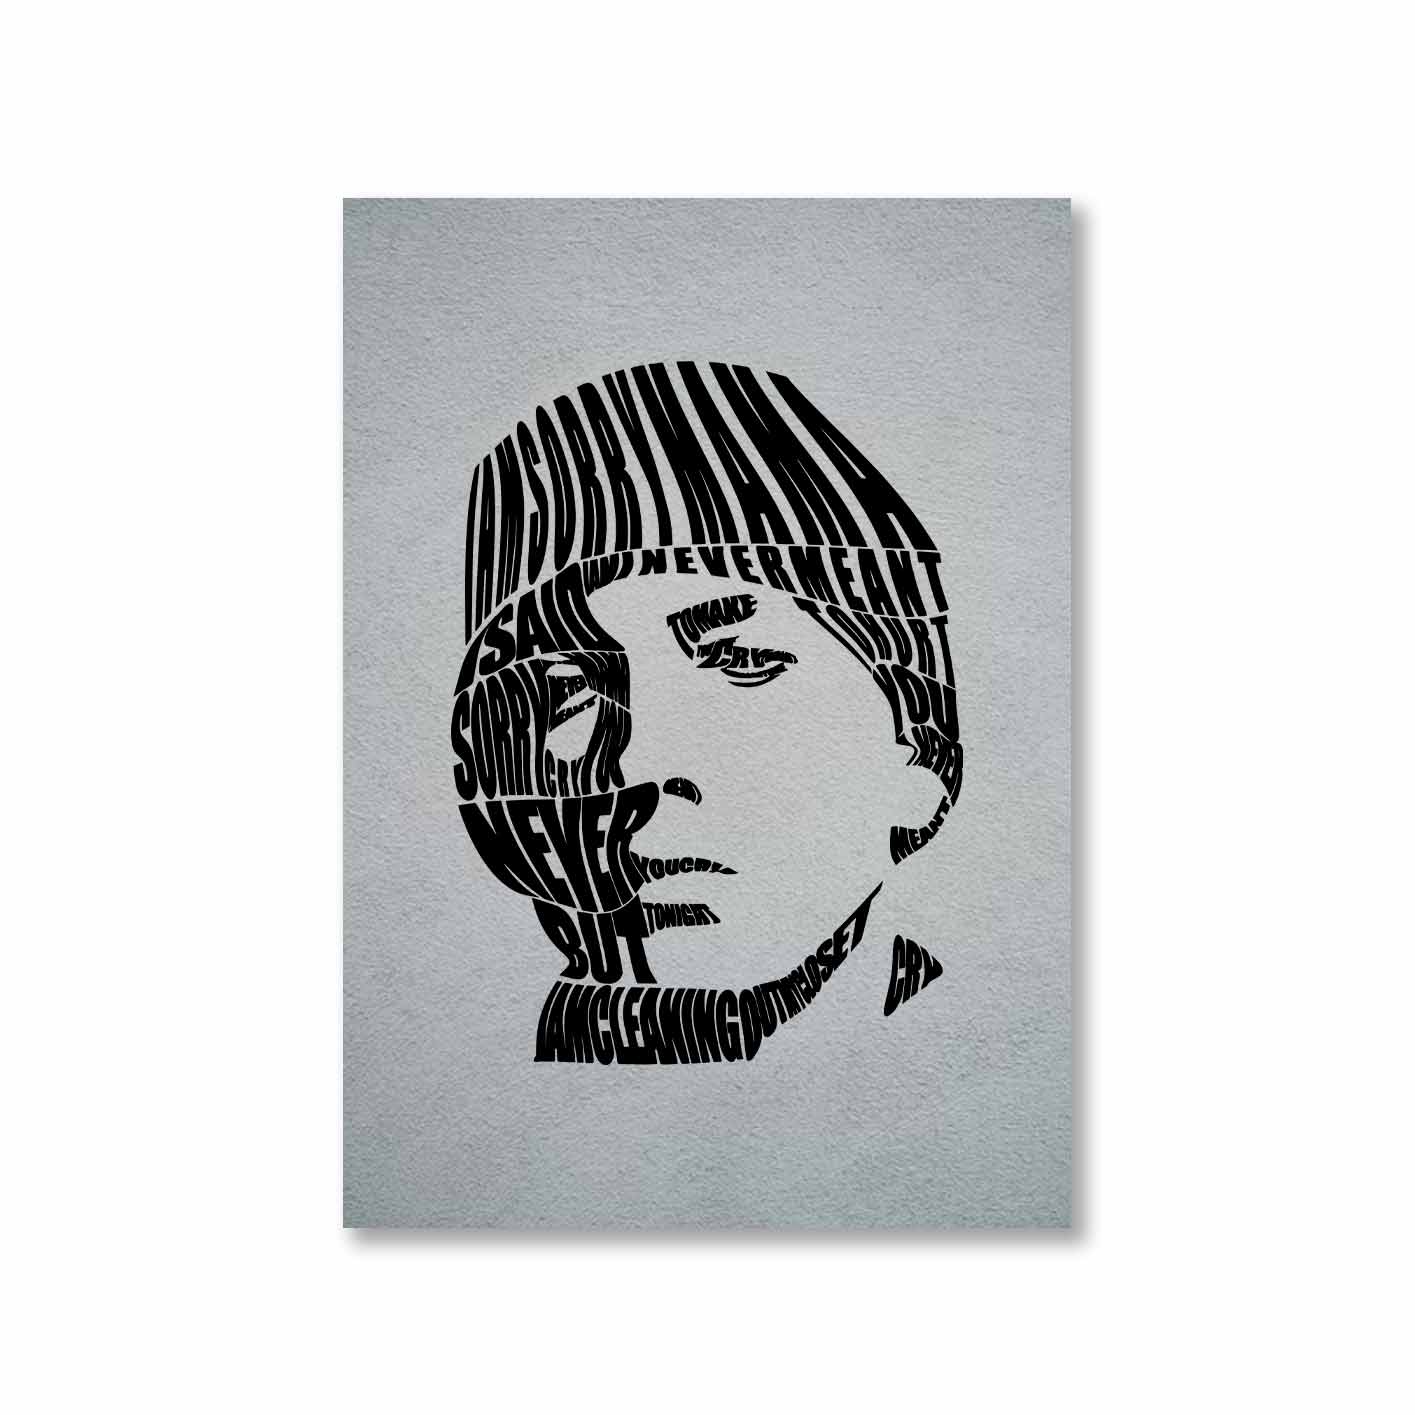 eminem cleaning out my closet poster wall art buy online india the banyan tee tbt a4